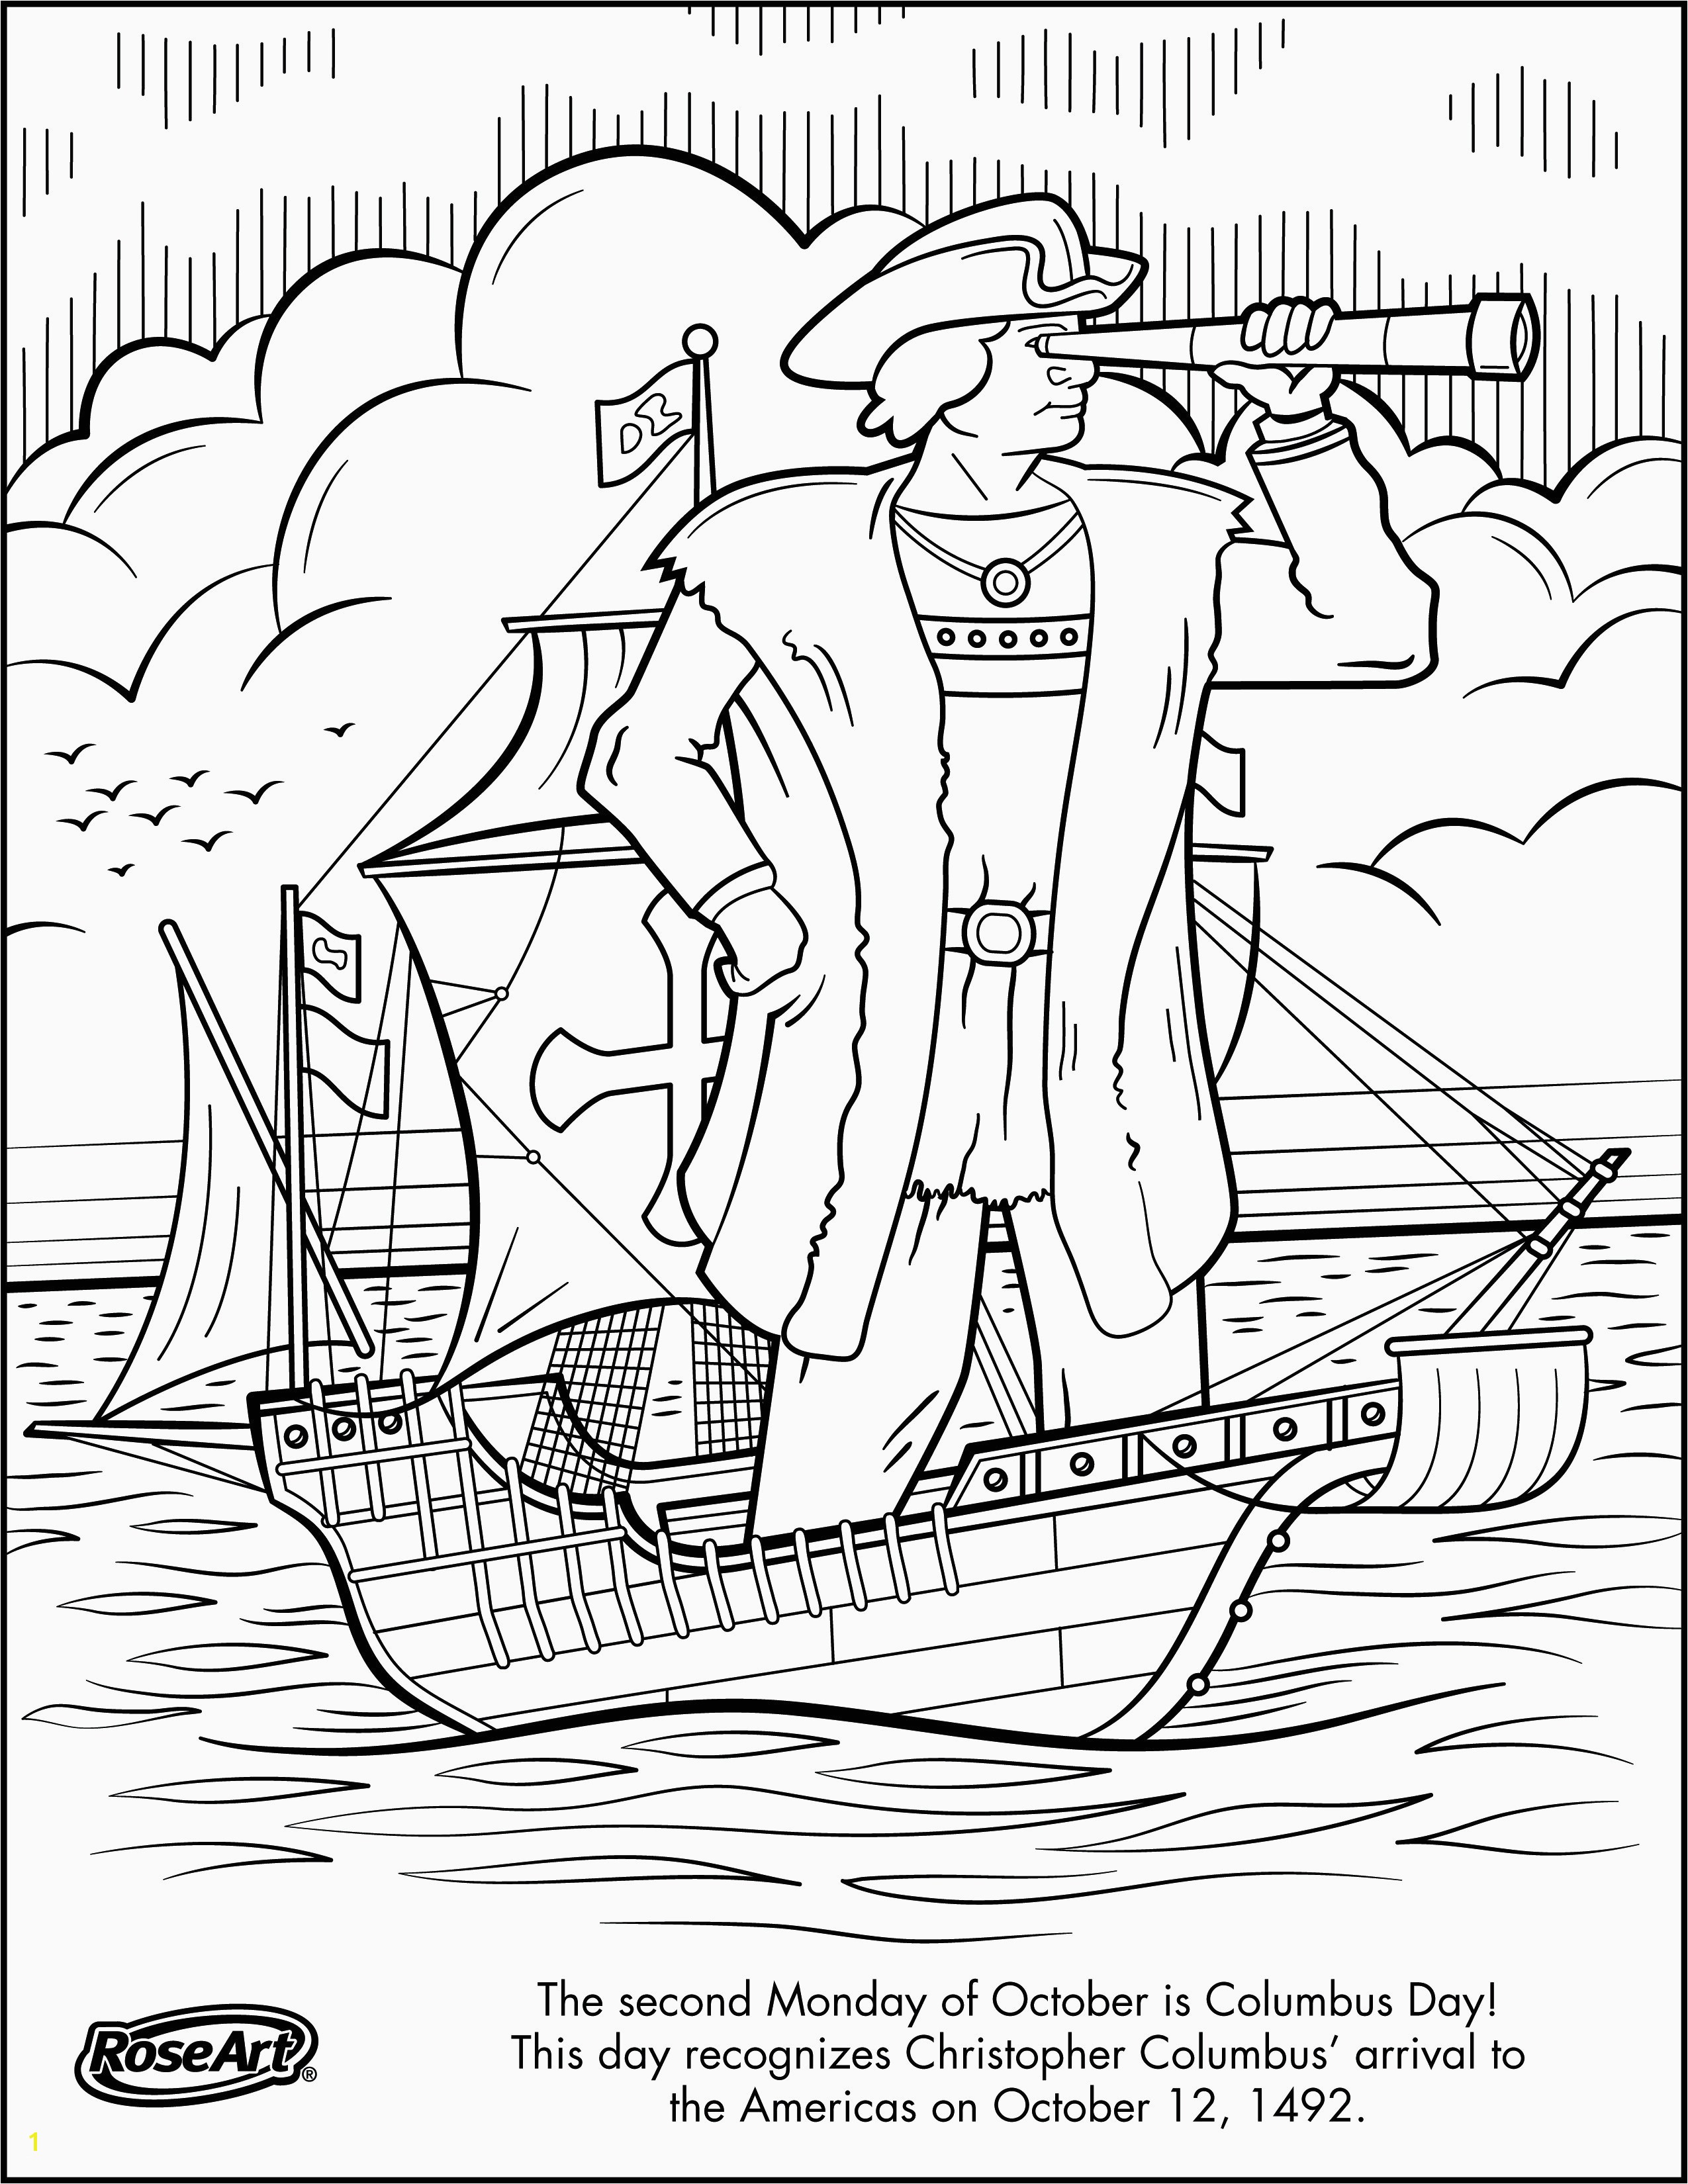 States Of Matter Coloring Pages 22 Awesome Iguana Coloring Page